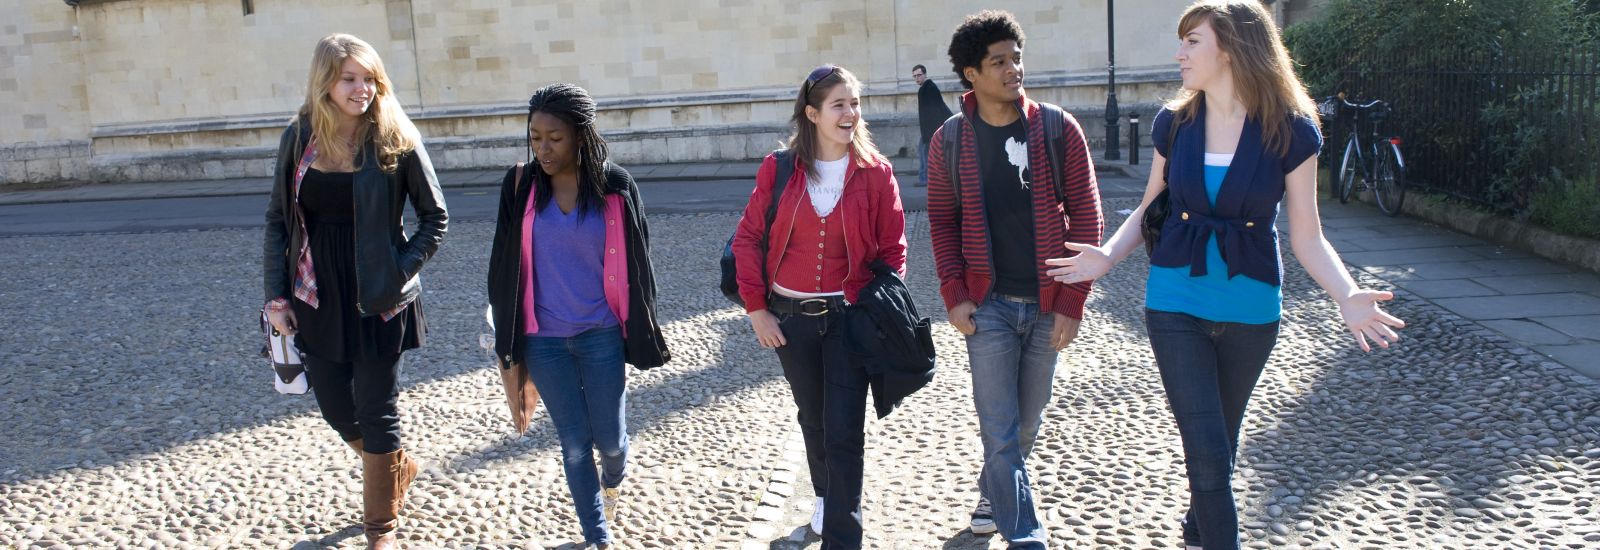 Group of students walking through Oxford